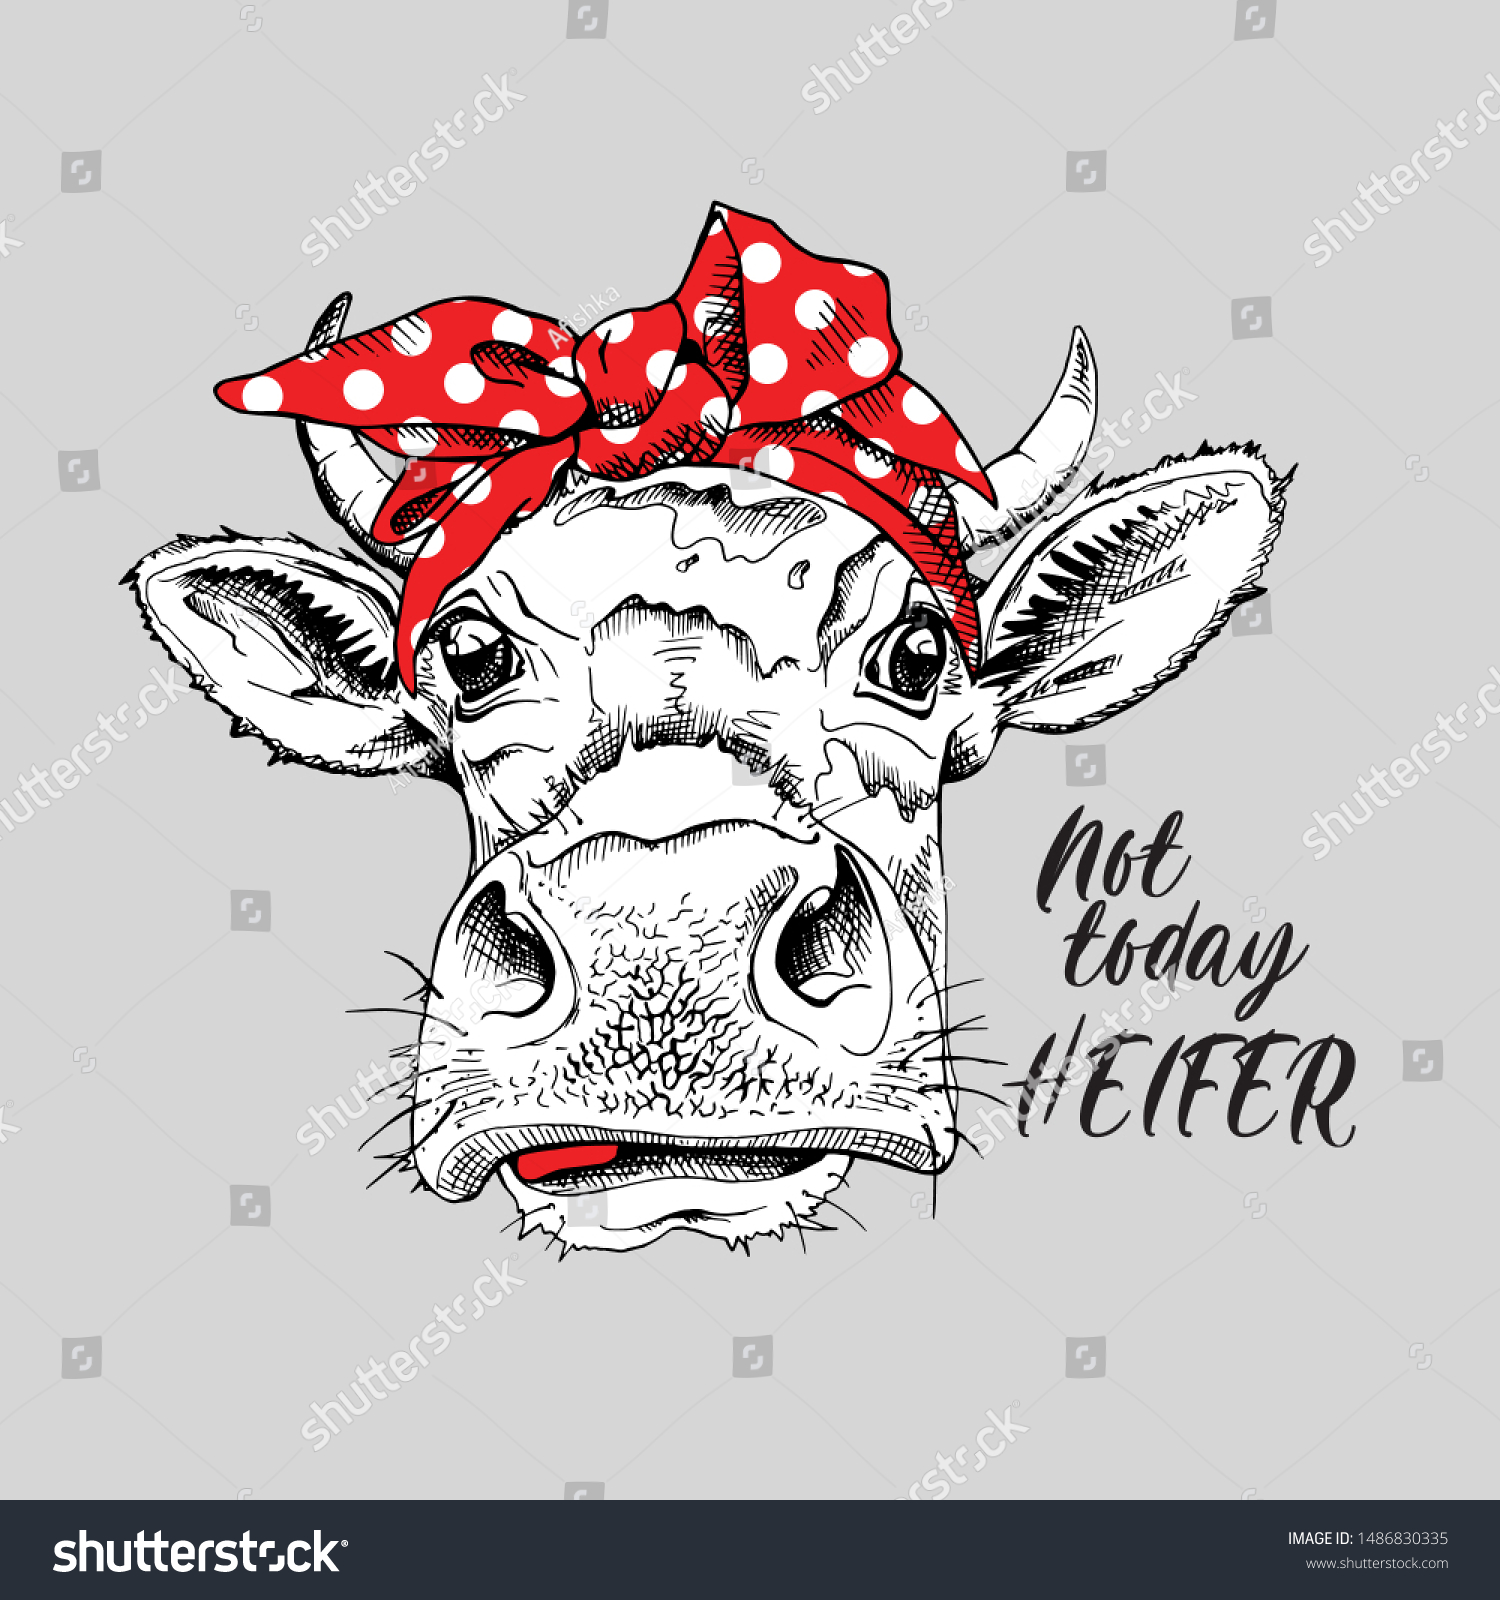 SVG of Cute cow in a red polka dot headband. Not today heifer - lettering quote. Humor card, t-shirt composition, hand drawn style print. Vector illustration. svg